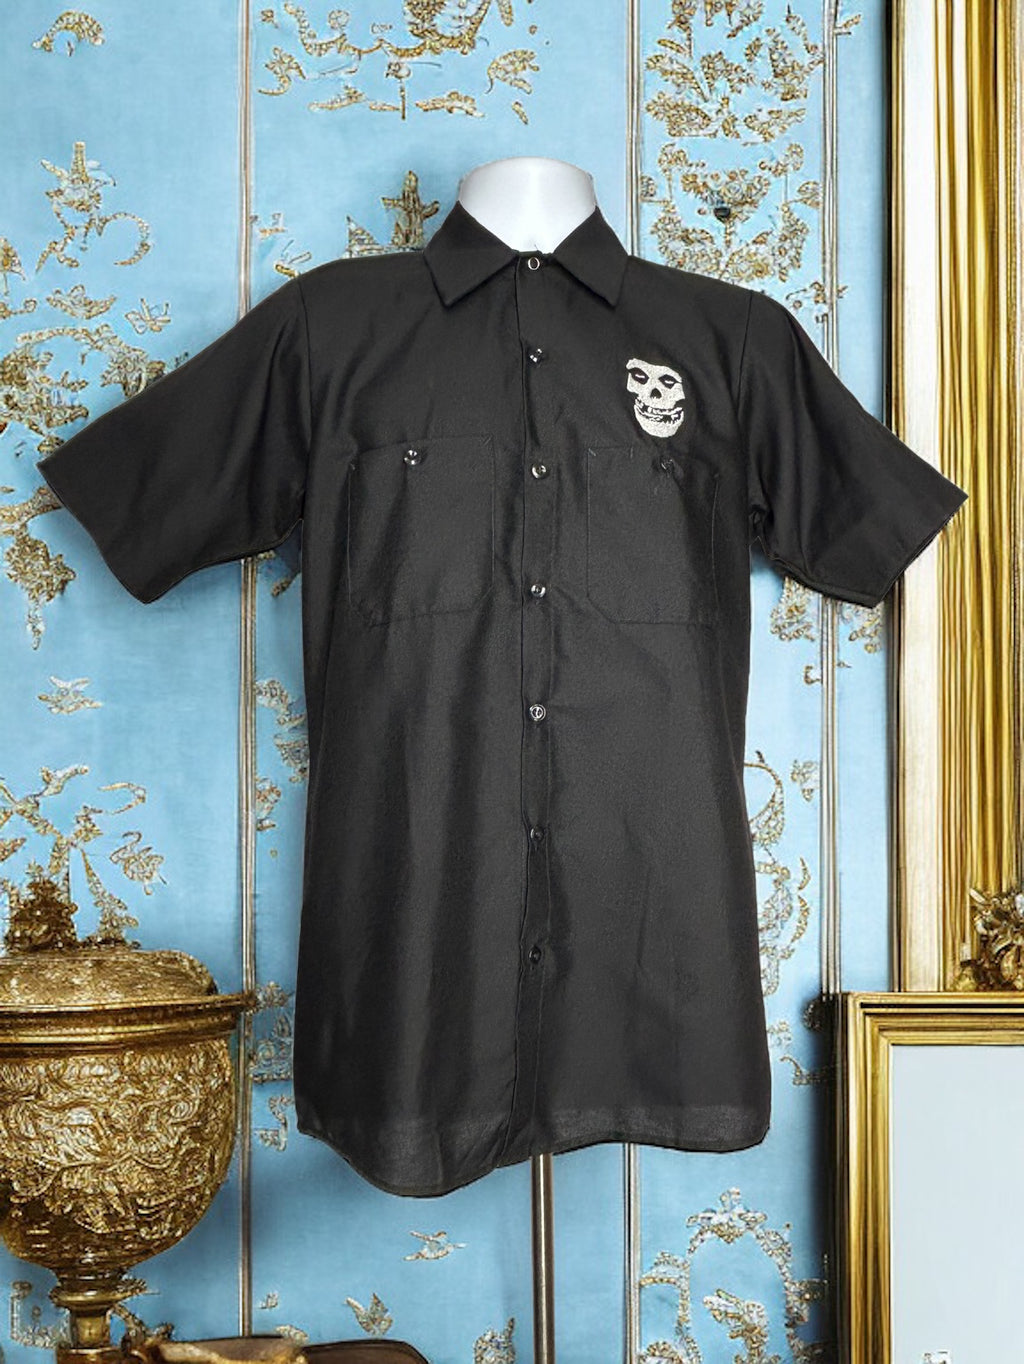 The Misfits Button Down Workshirt